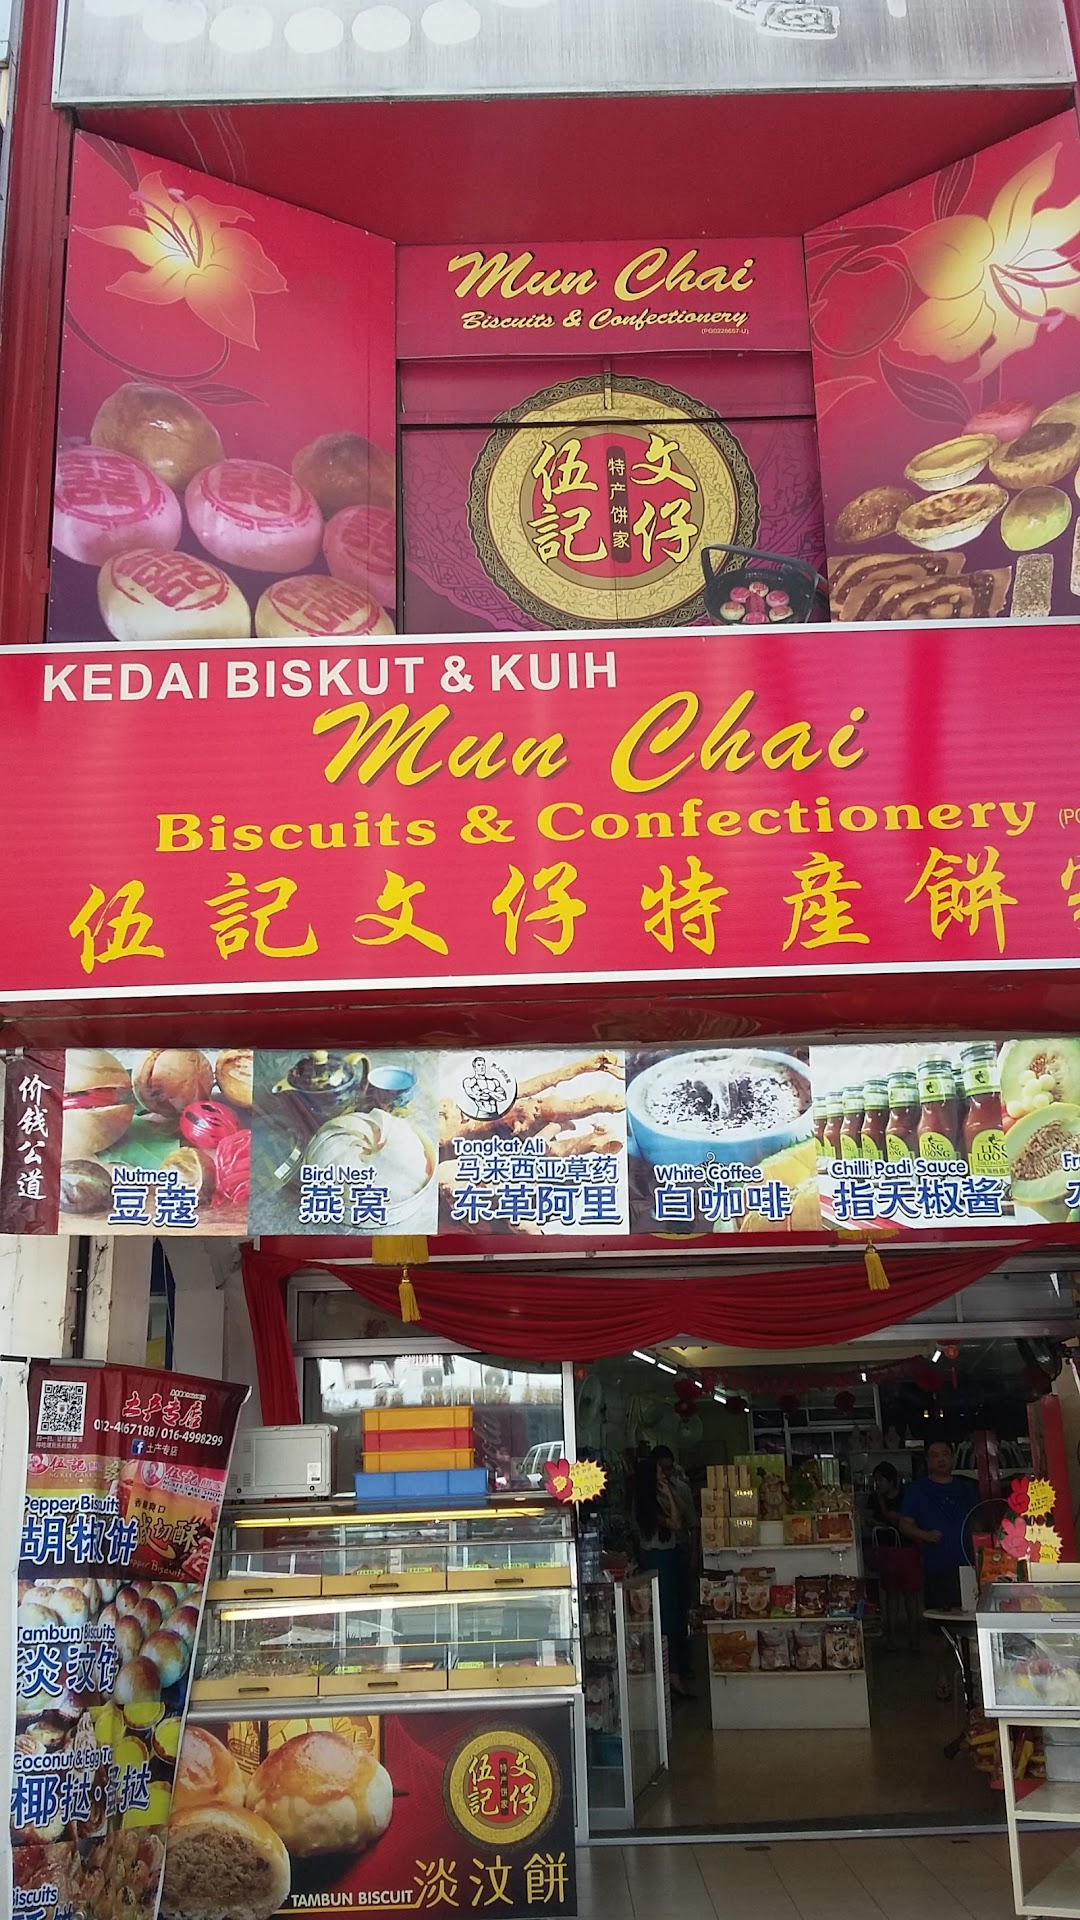 Mun Chai Biscuits & Confectionery